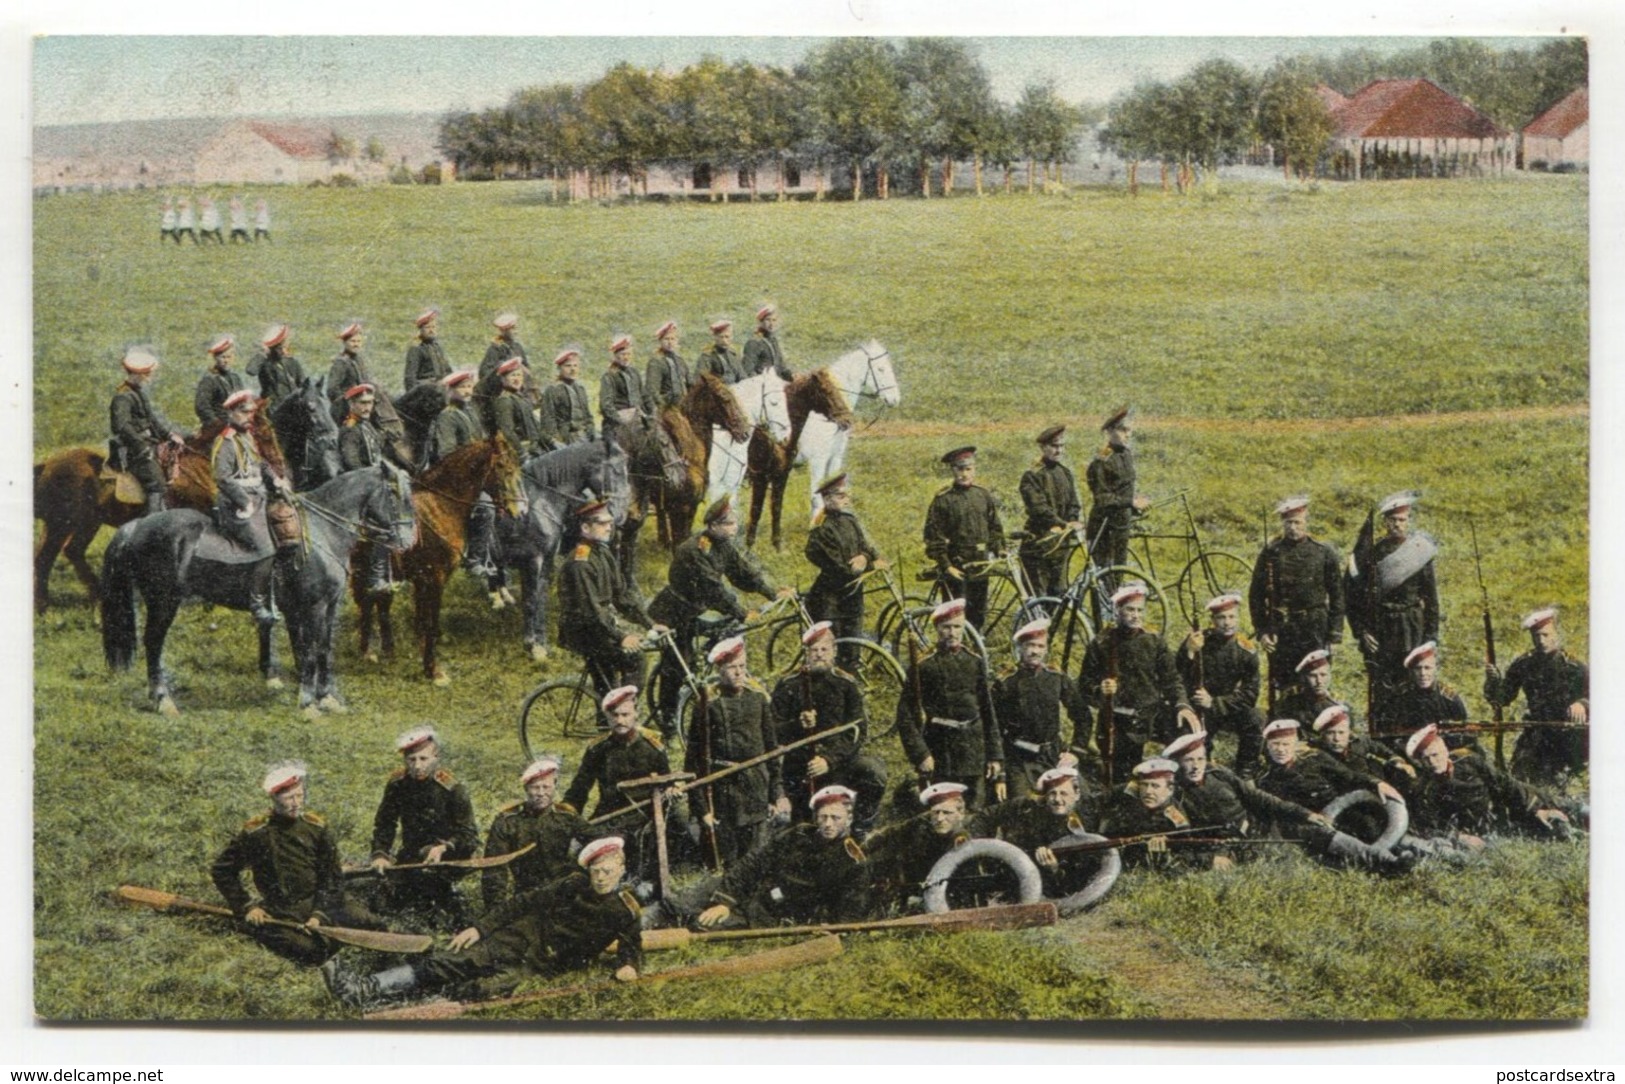 European Soldiers, Unknown Country, Horses, Bicycles, Oars - Old Dr Trenkler Postcard, Series 470 / 5 - Manoeuvres